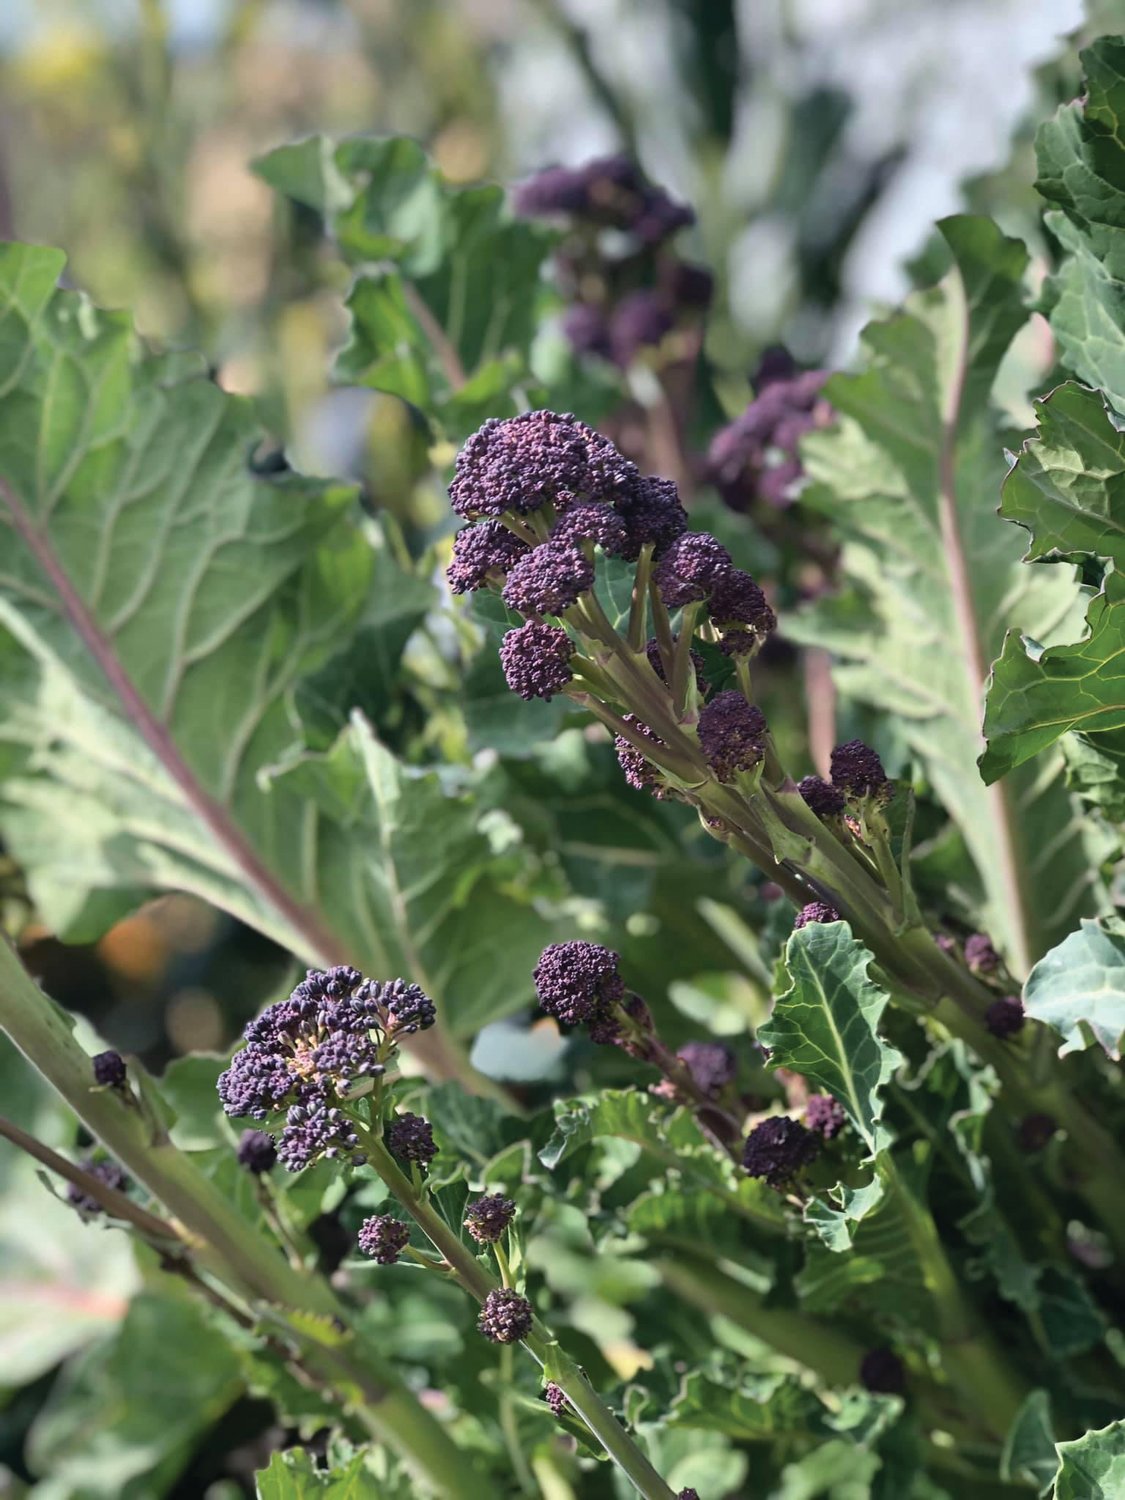 Many winter crops do well in our region, including purple sprouting broccoli. Plant now for early spring harvest.